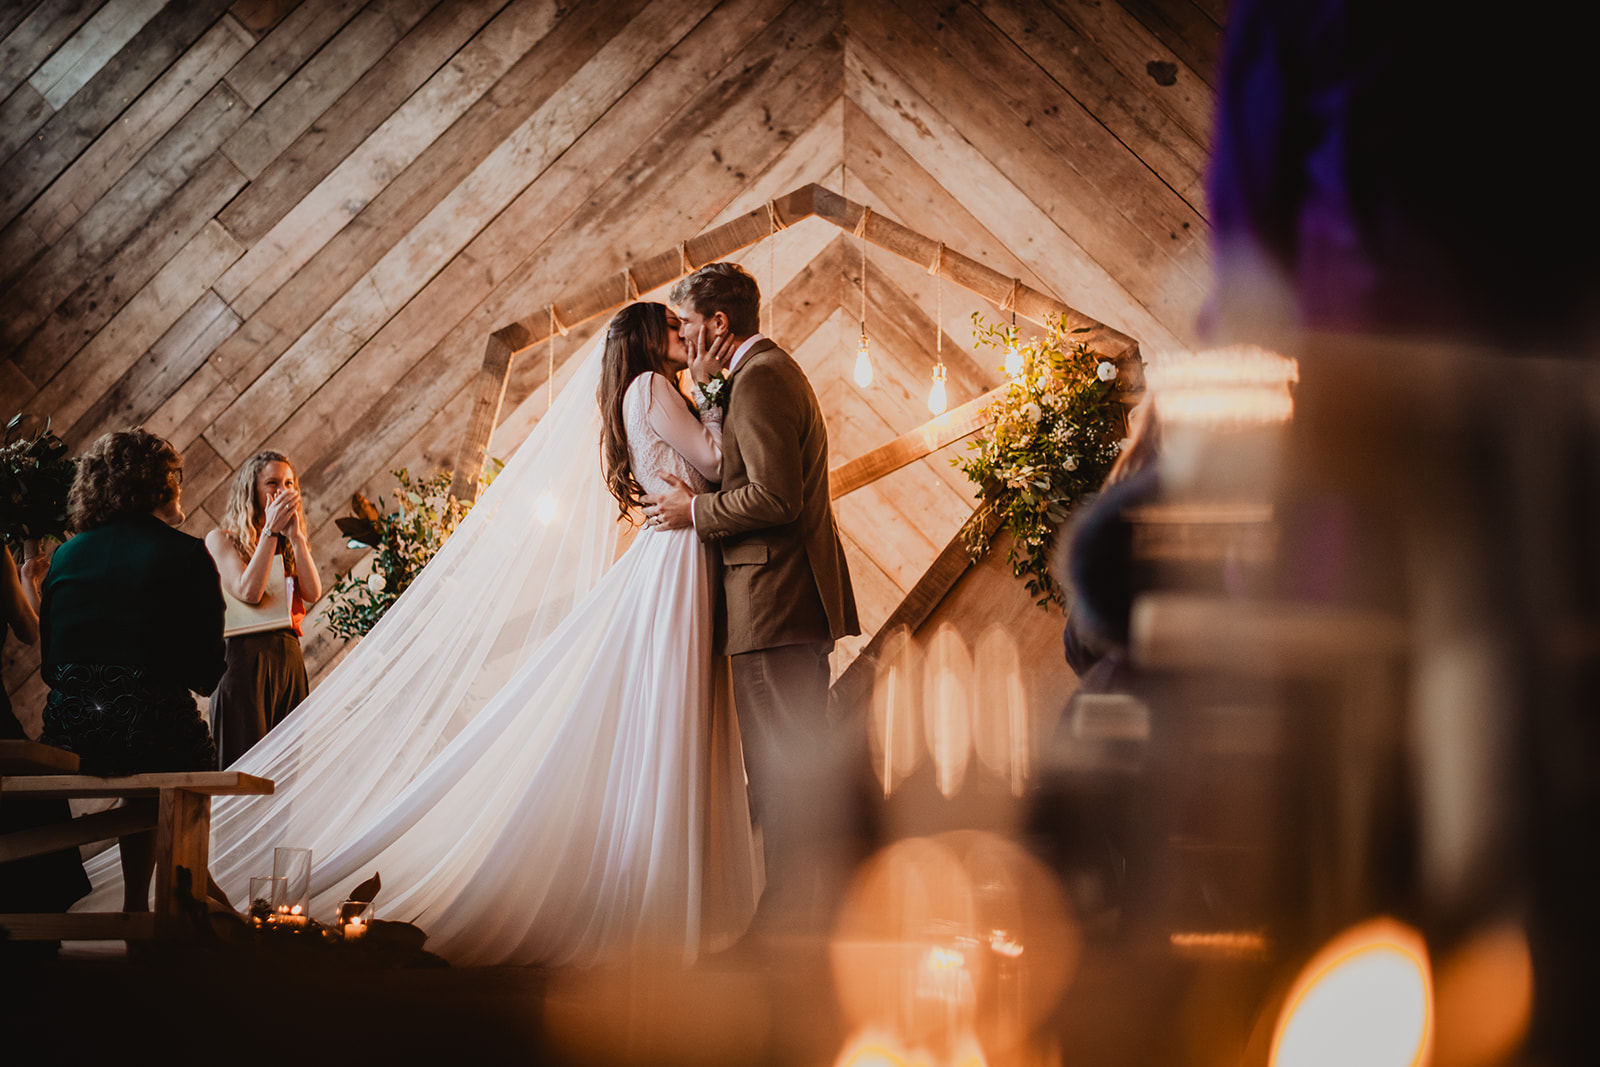 A bride and groom share a romantic first kiss at the Manor Barn in Harlton